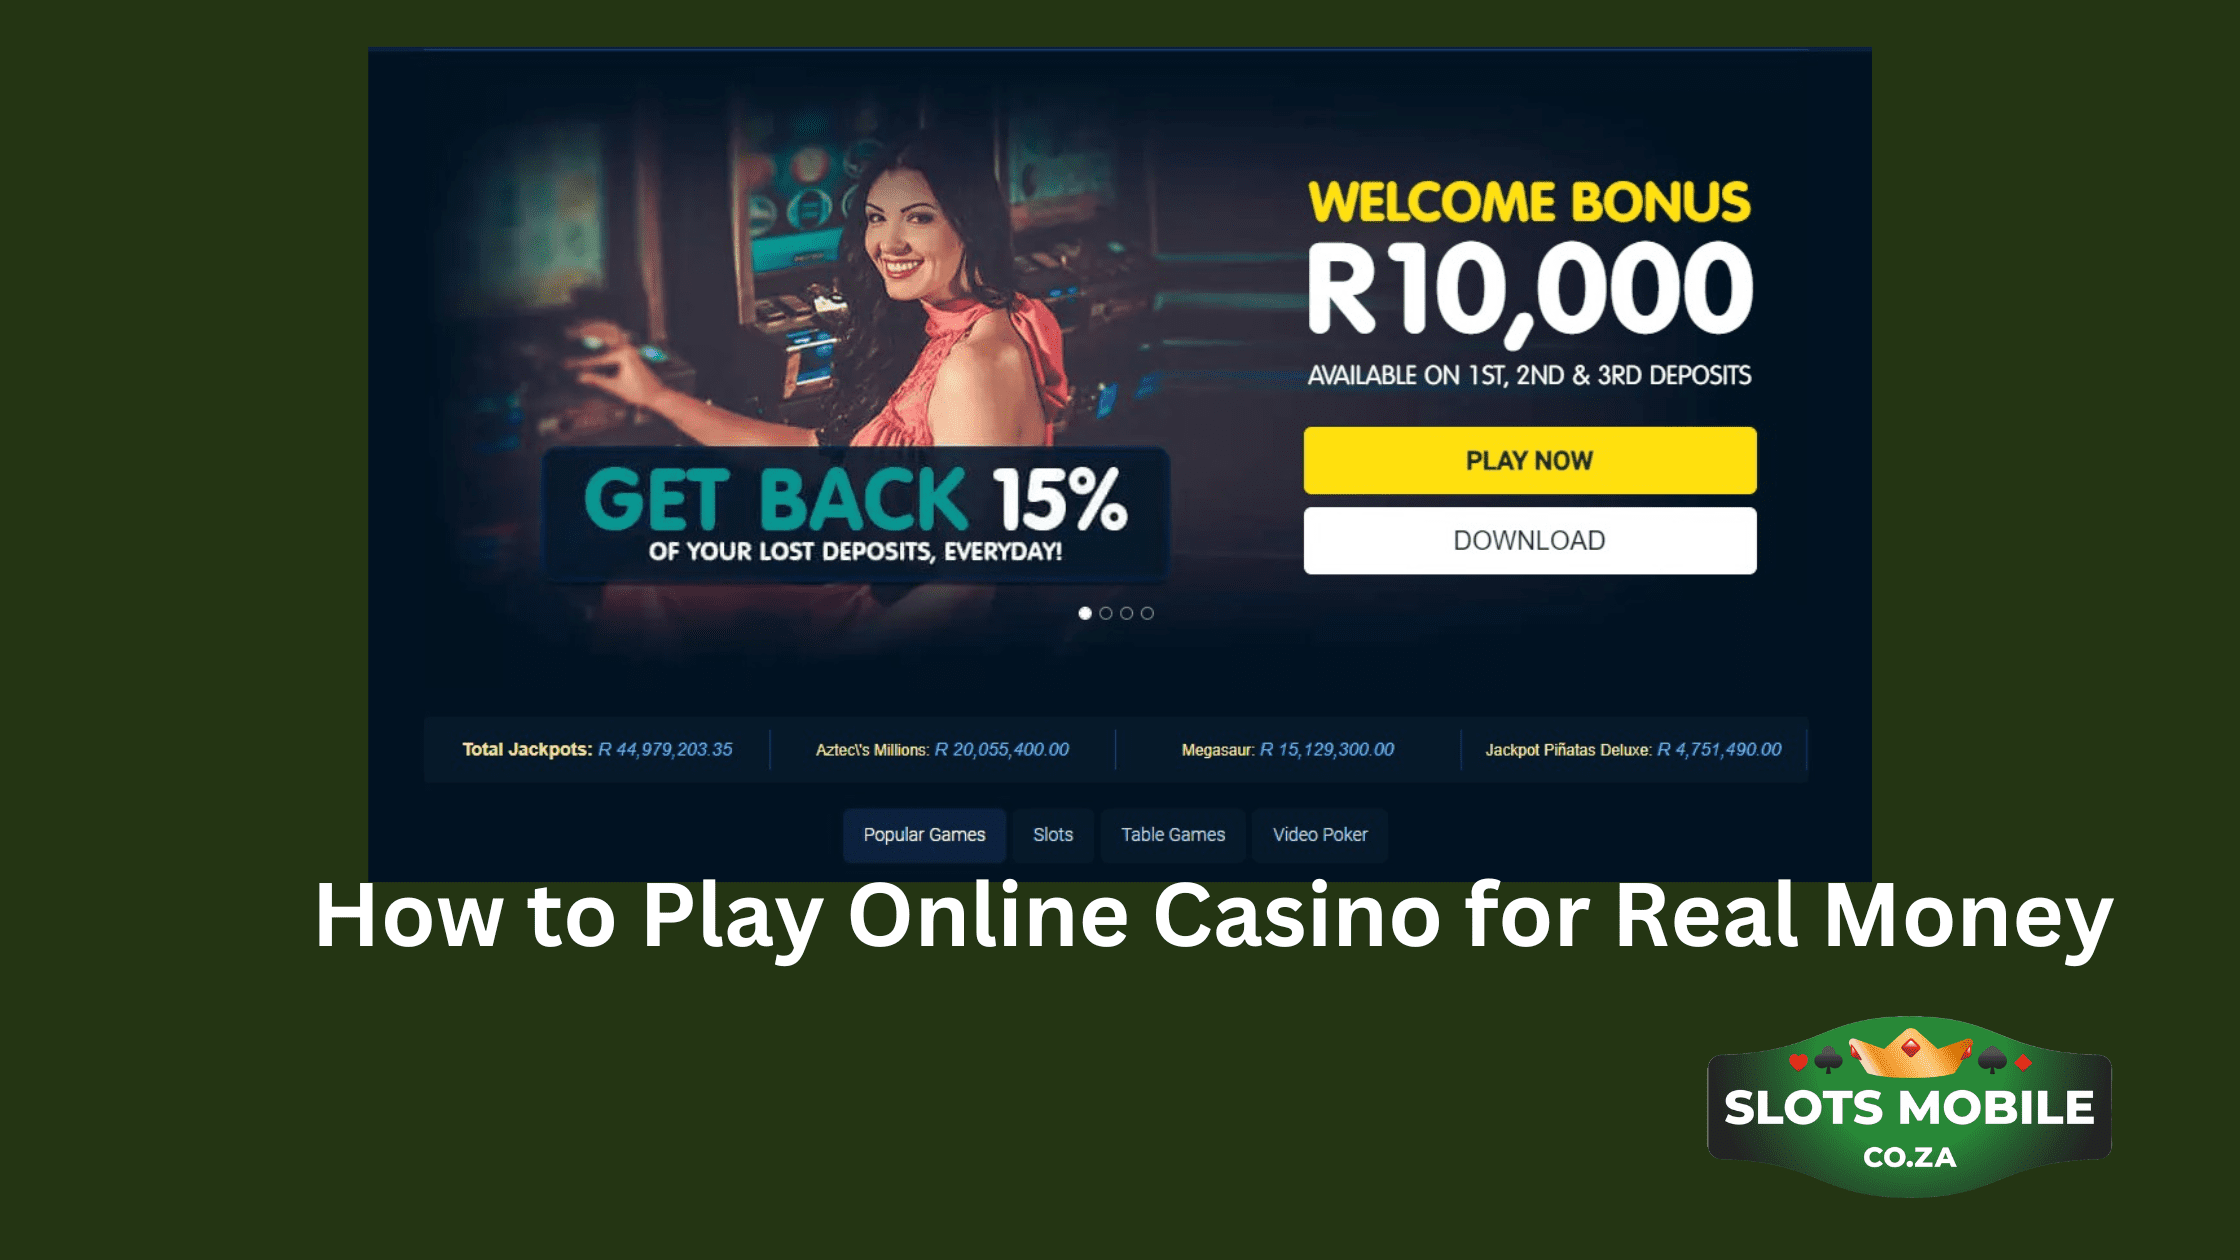 How to Play Online Casino for Real Money